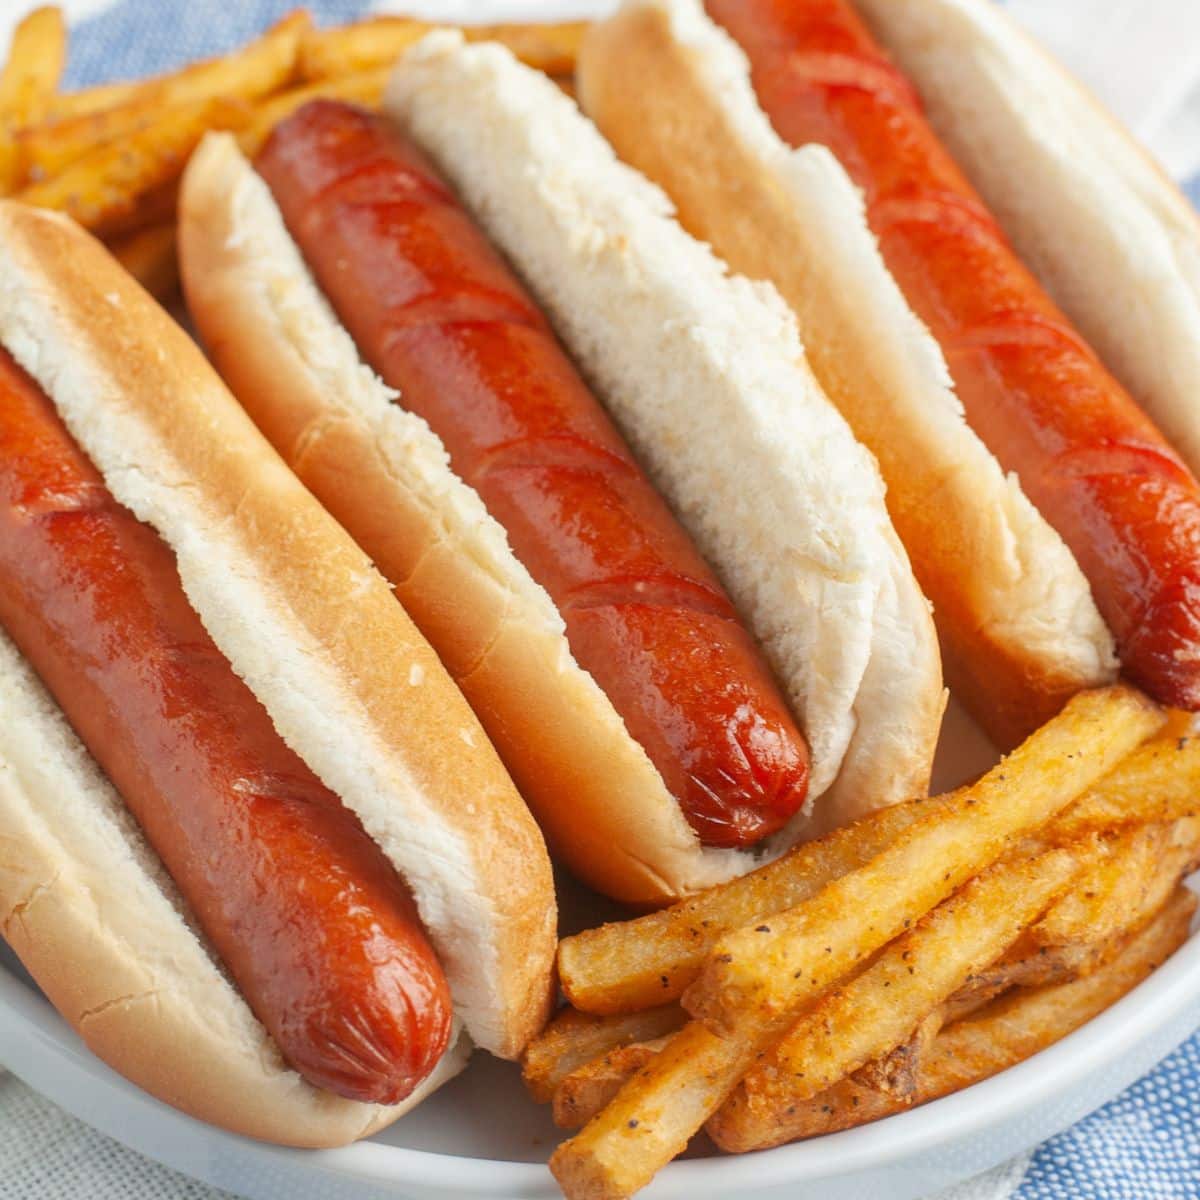 Hot dogs on a plate with french fries.